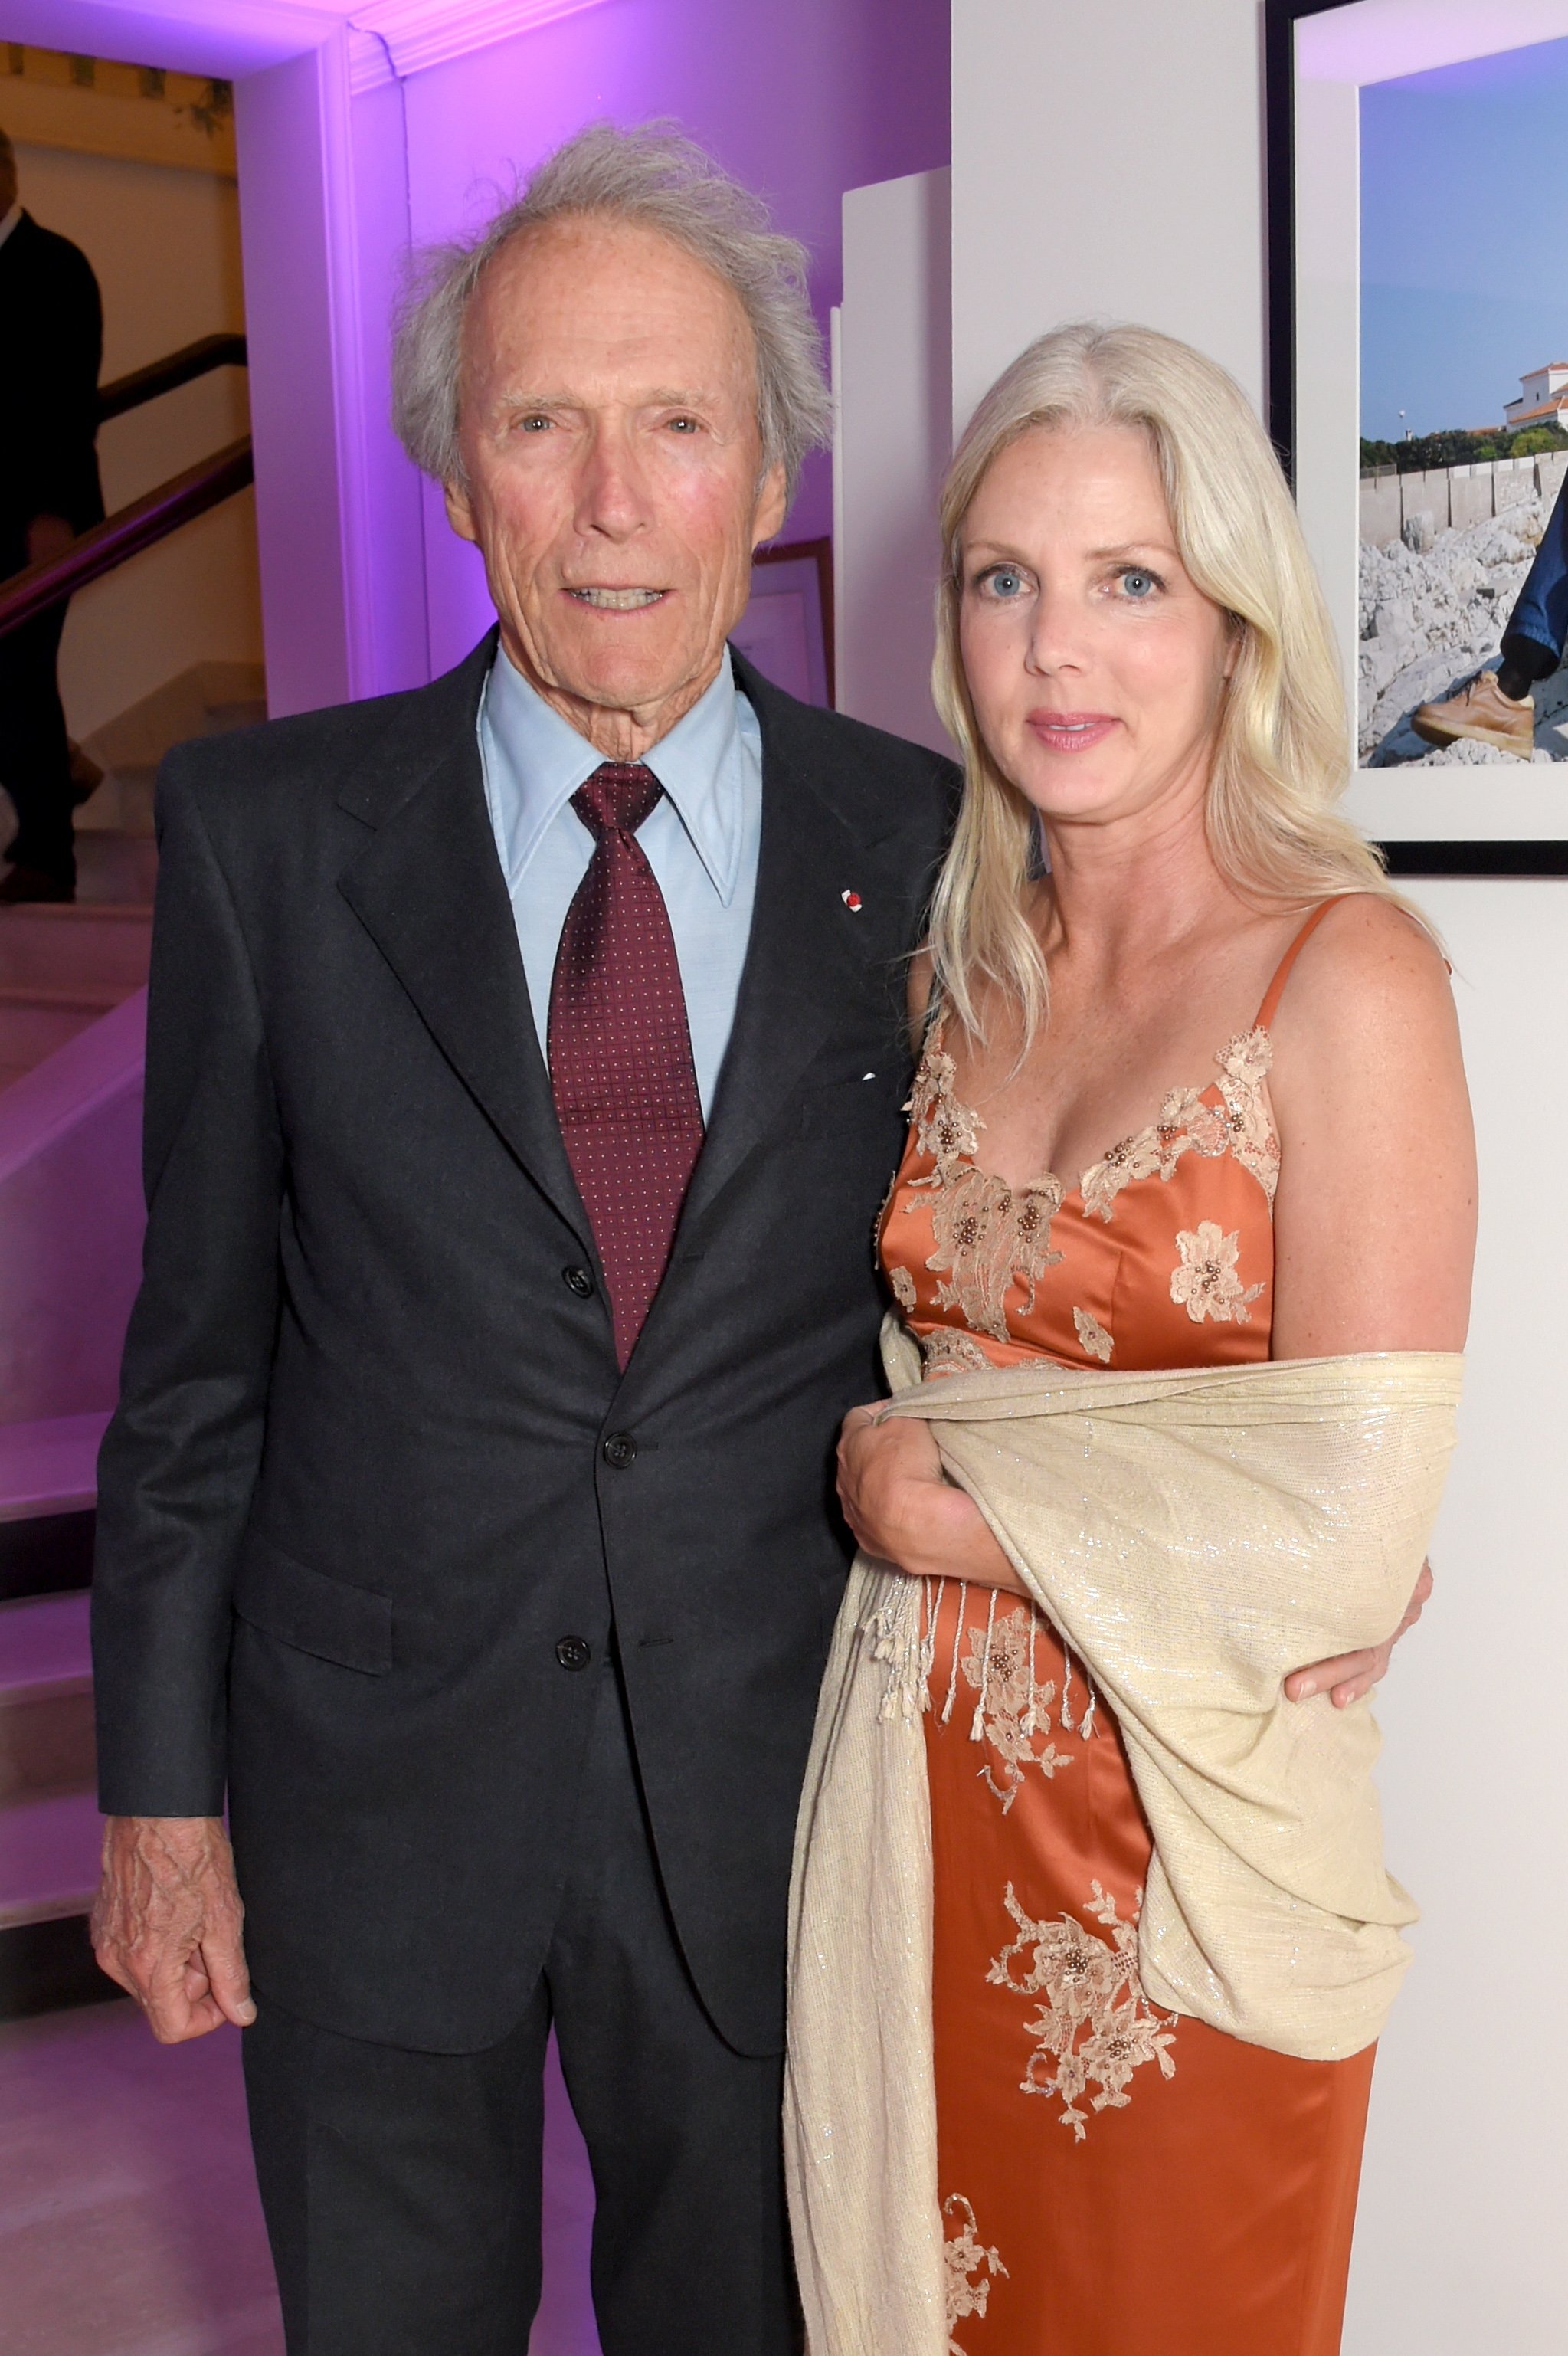 Clint Eastwood and Christina Sandera at the Vanity Fair and Chopard Party celebrating the Cannes Film Festival, 2017 in Cap d'Antibes, France. | Photo: Getty Images